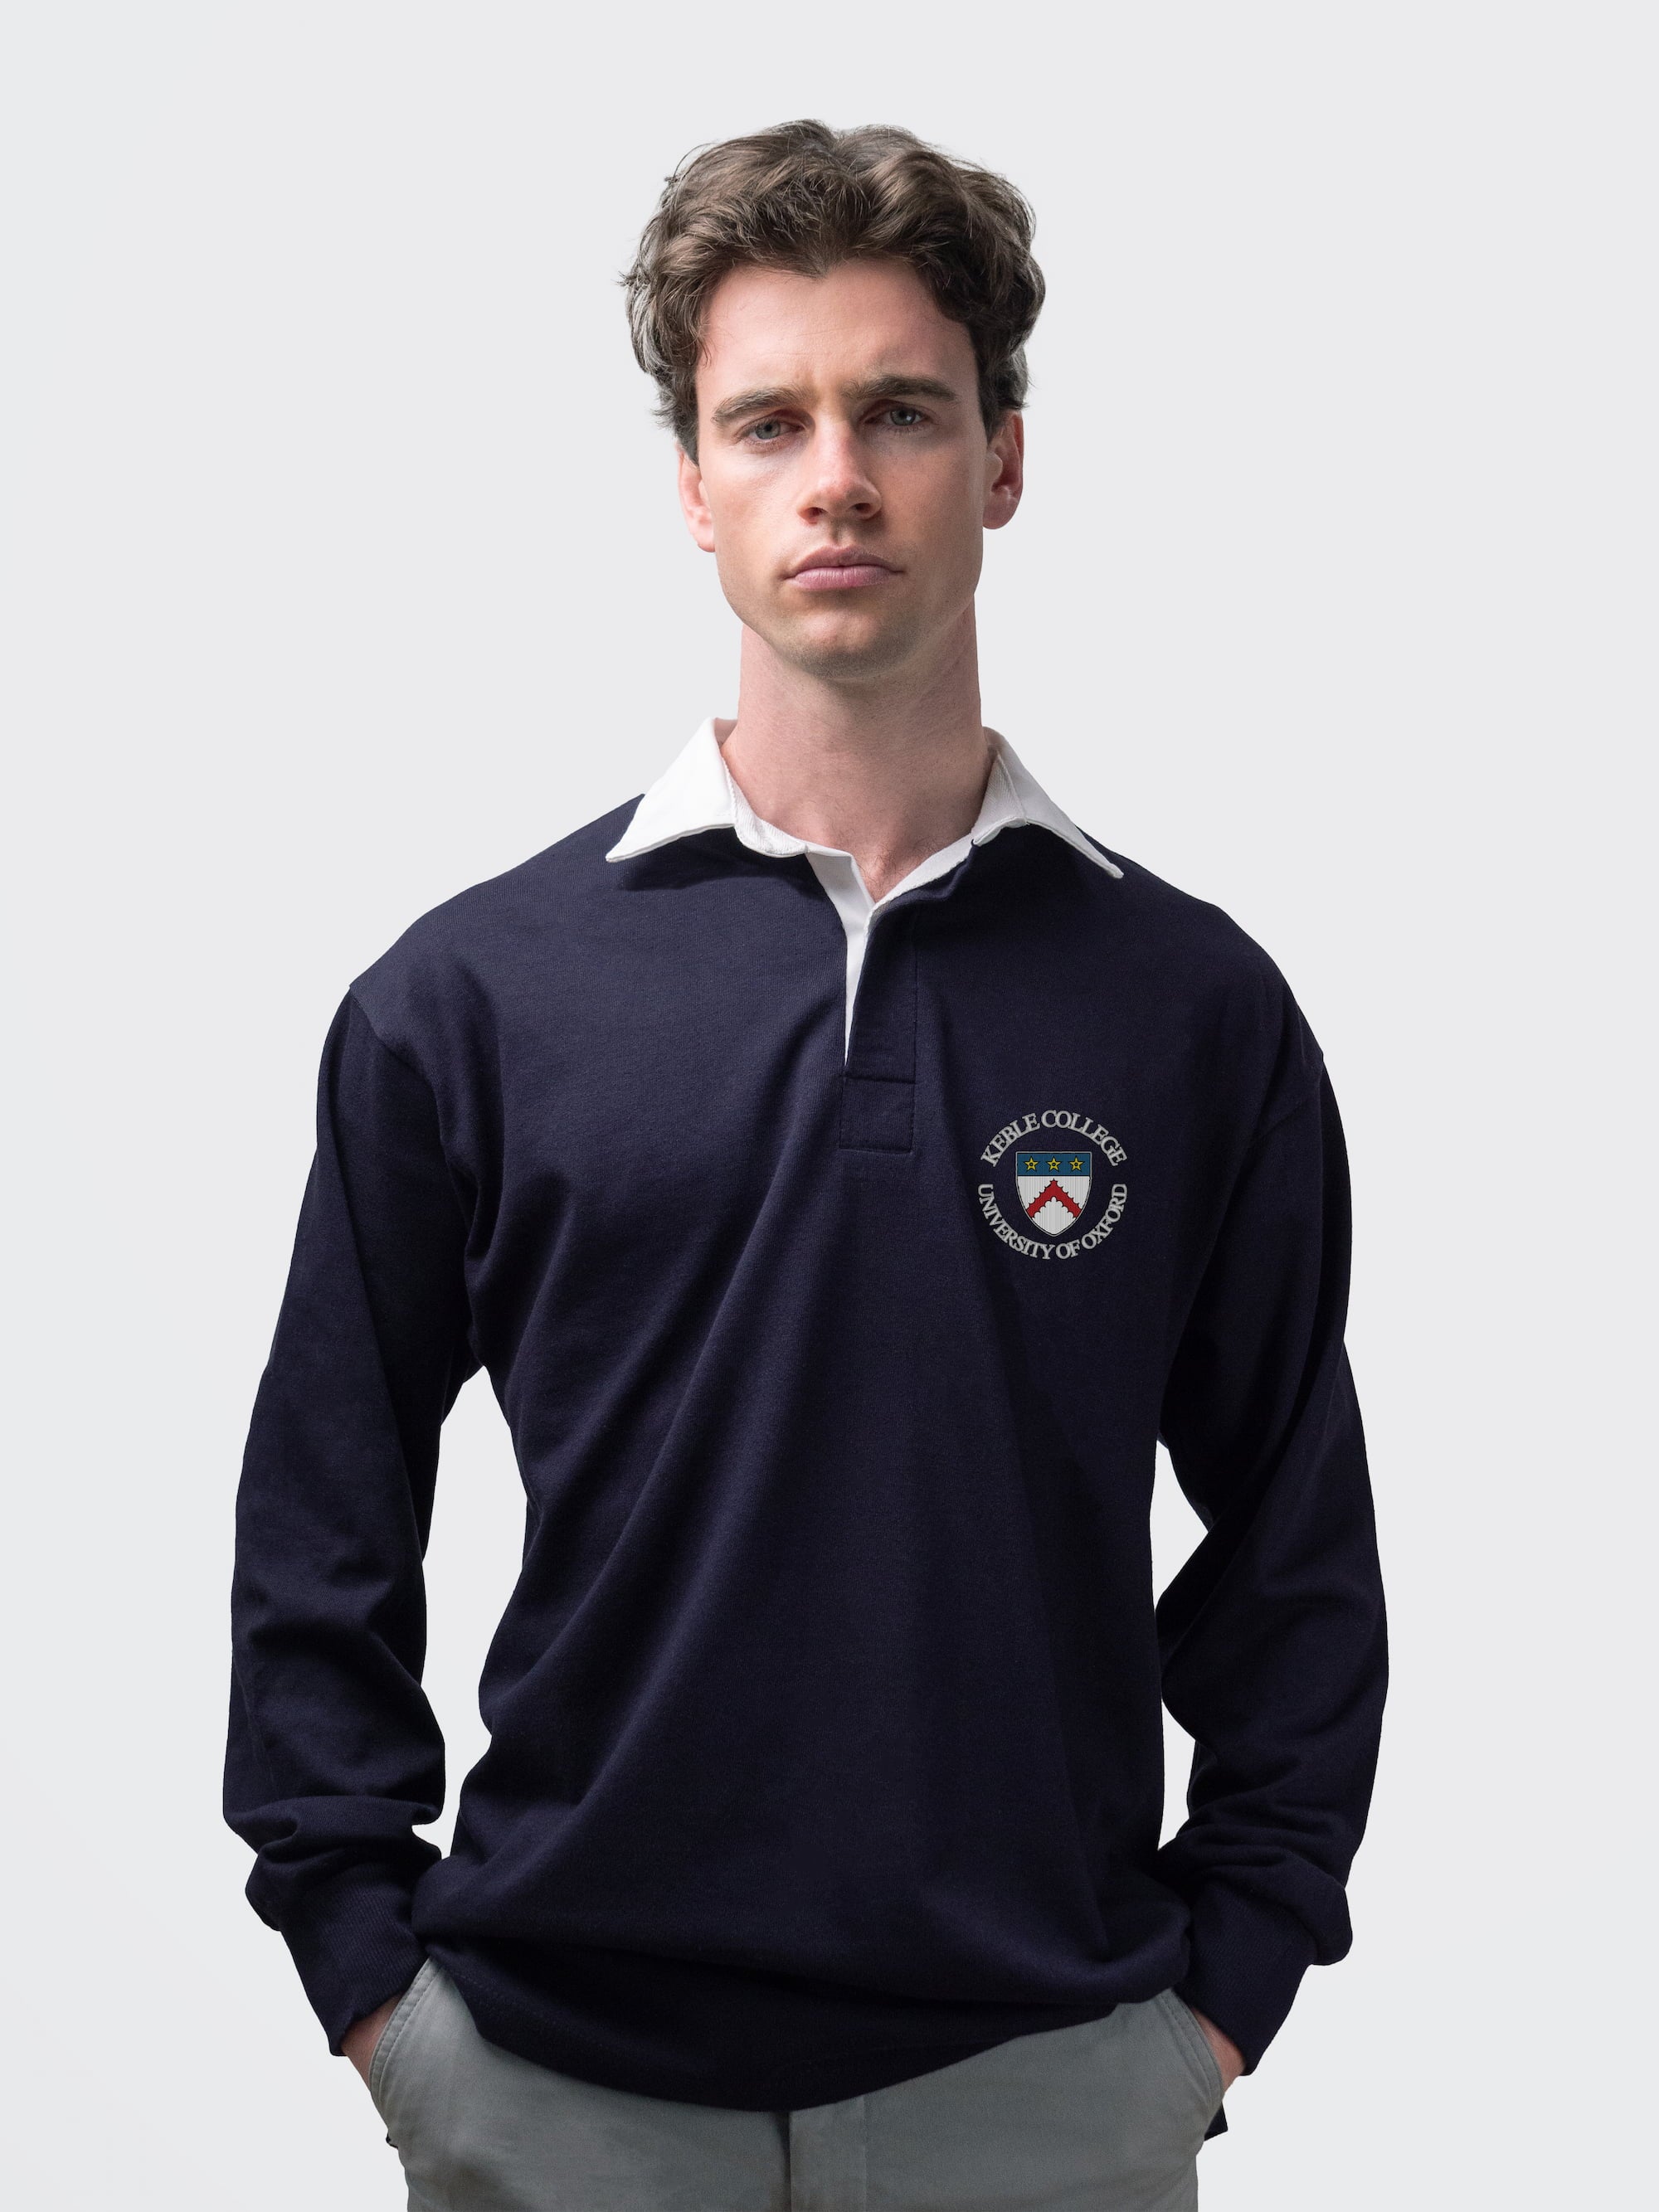 Keble student wearing an embroidered mens rugby shirt in navy